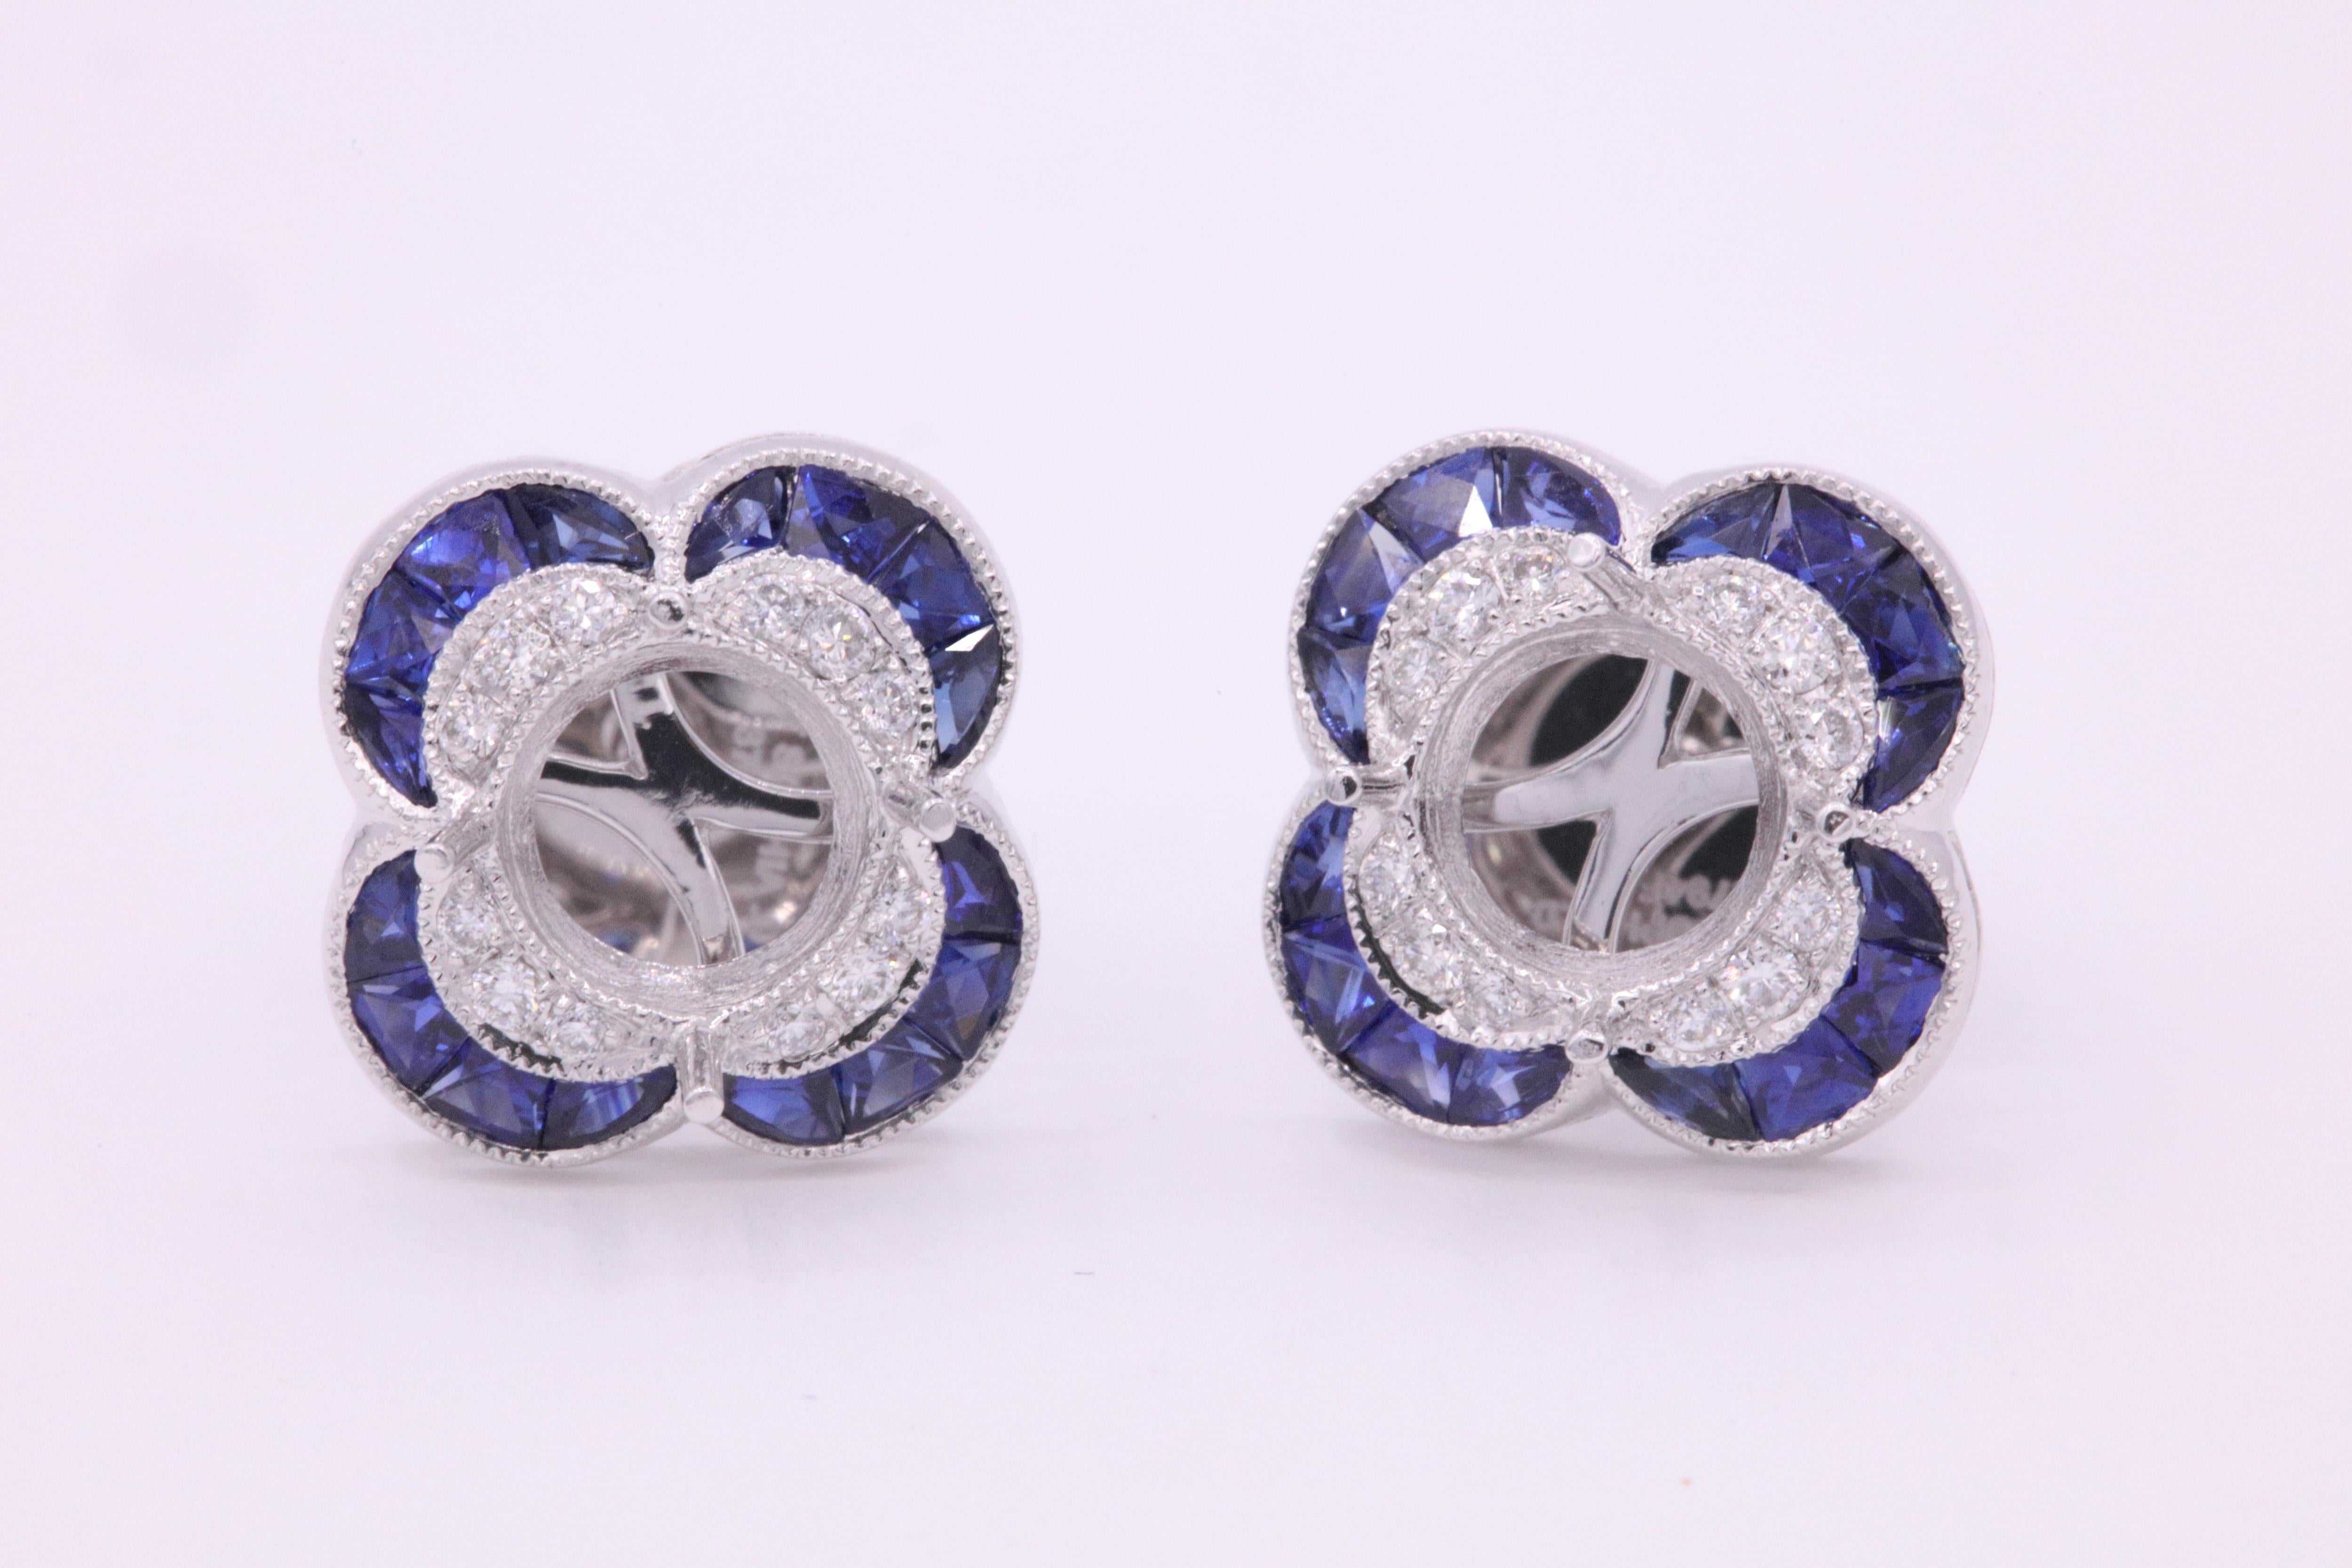 Gorgeous Art Deco style bezel earrings featuring vibrant blue sapphires weighing 1.05 carats and round brilliants weighing 0.14 carats crafted in platinum.
Measures 3/8-1/4